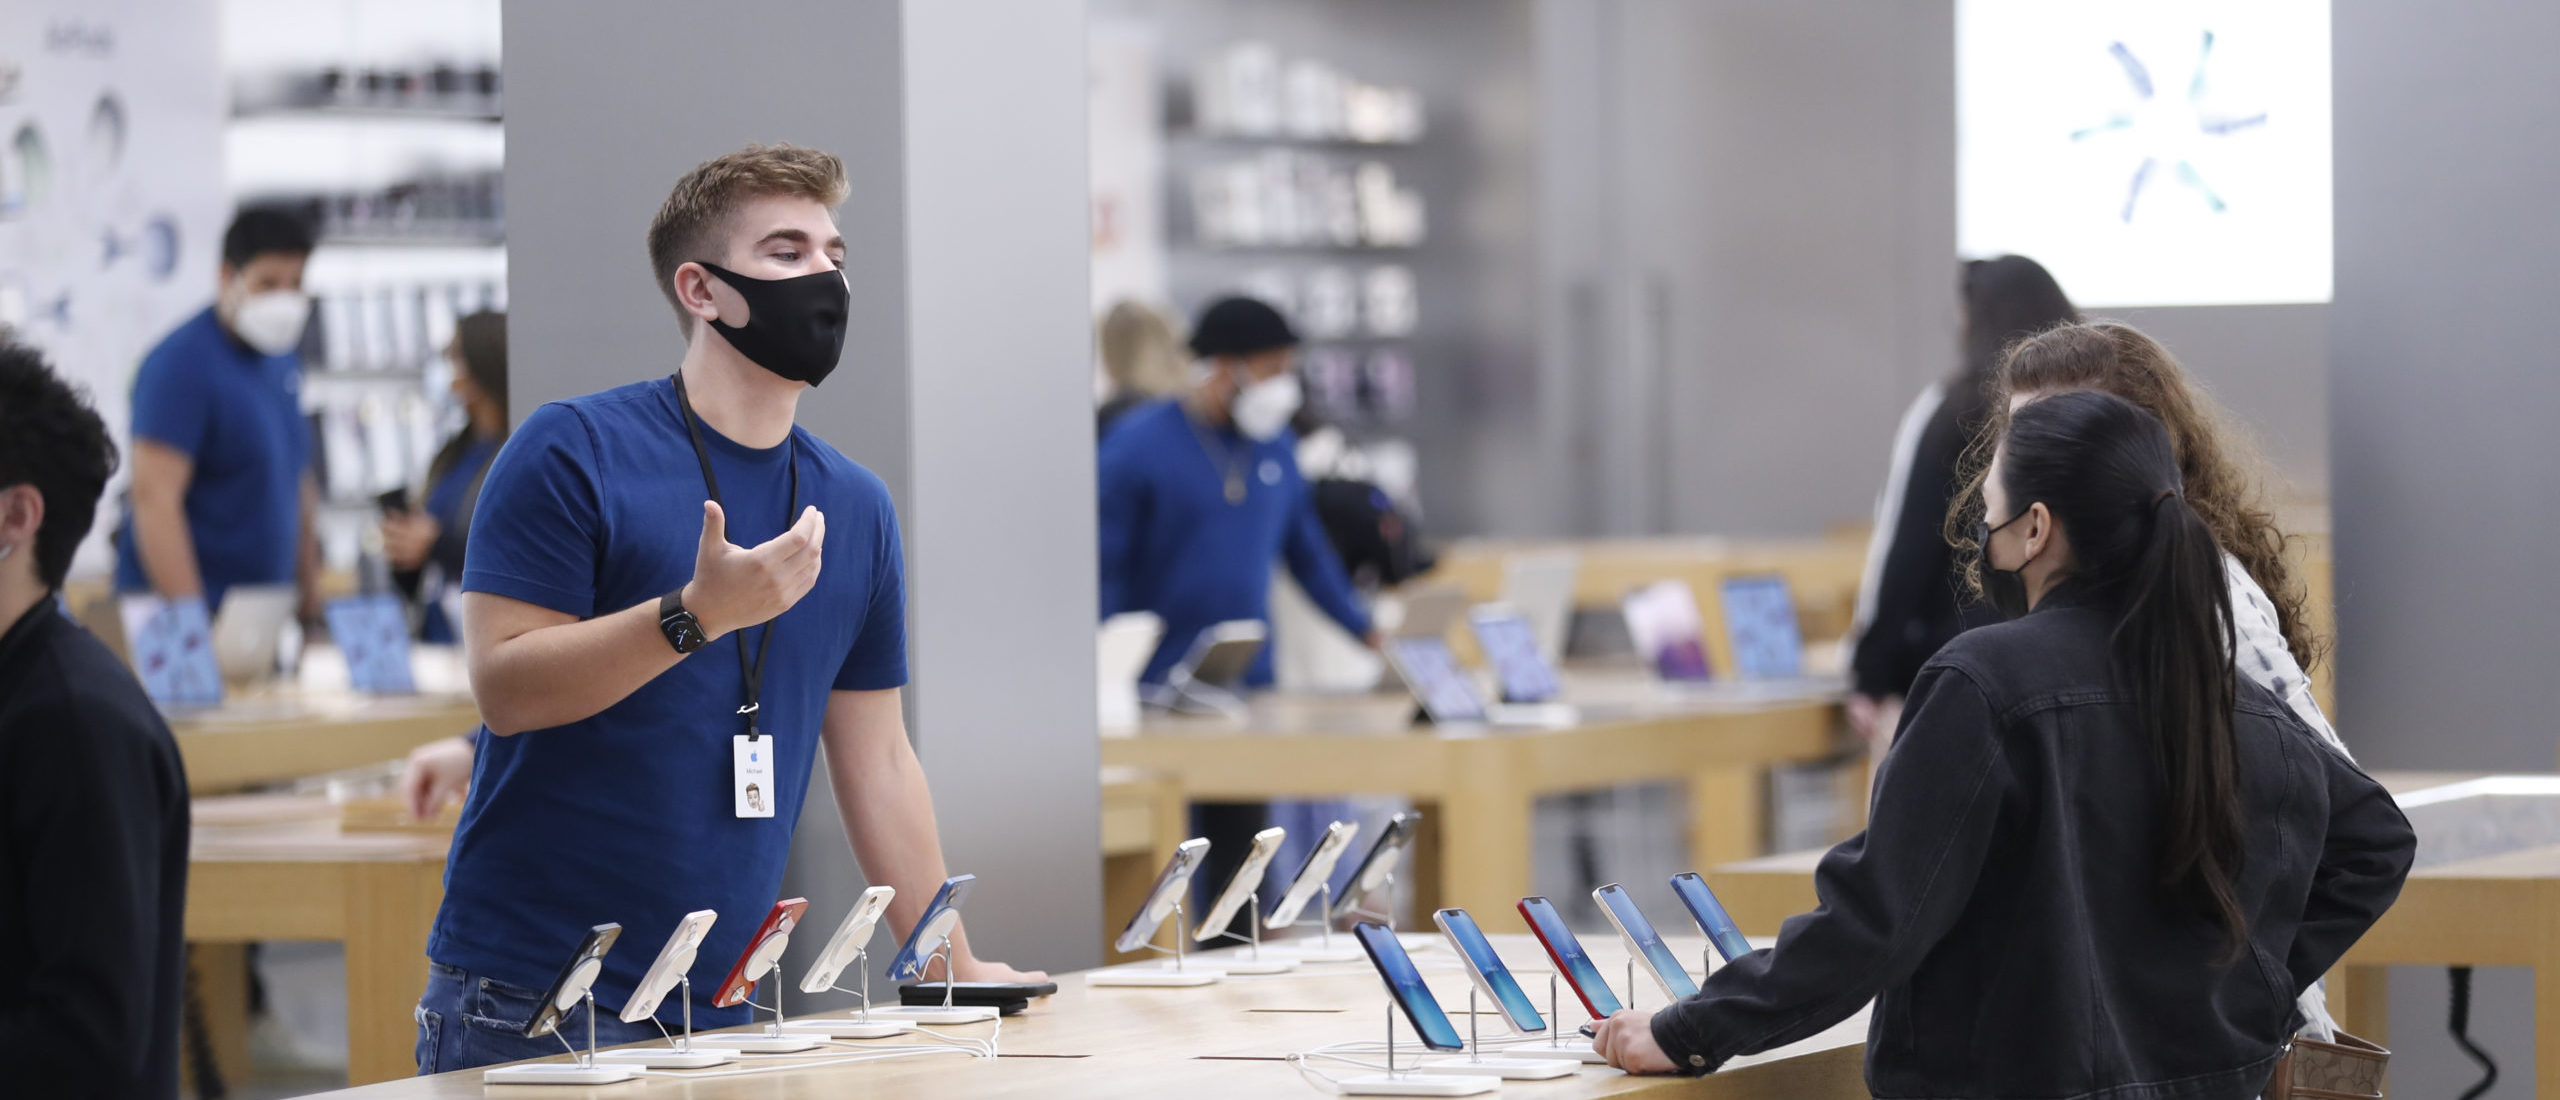 The Apple store employee helps customers during Black Friday at International Plaza on November 26, 2021 in Tampa, United States. (Photo by Octavio Jones/Getty Images)